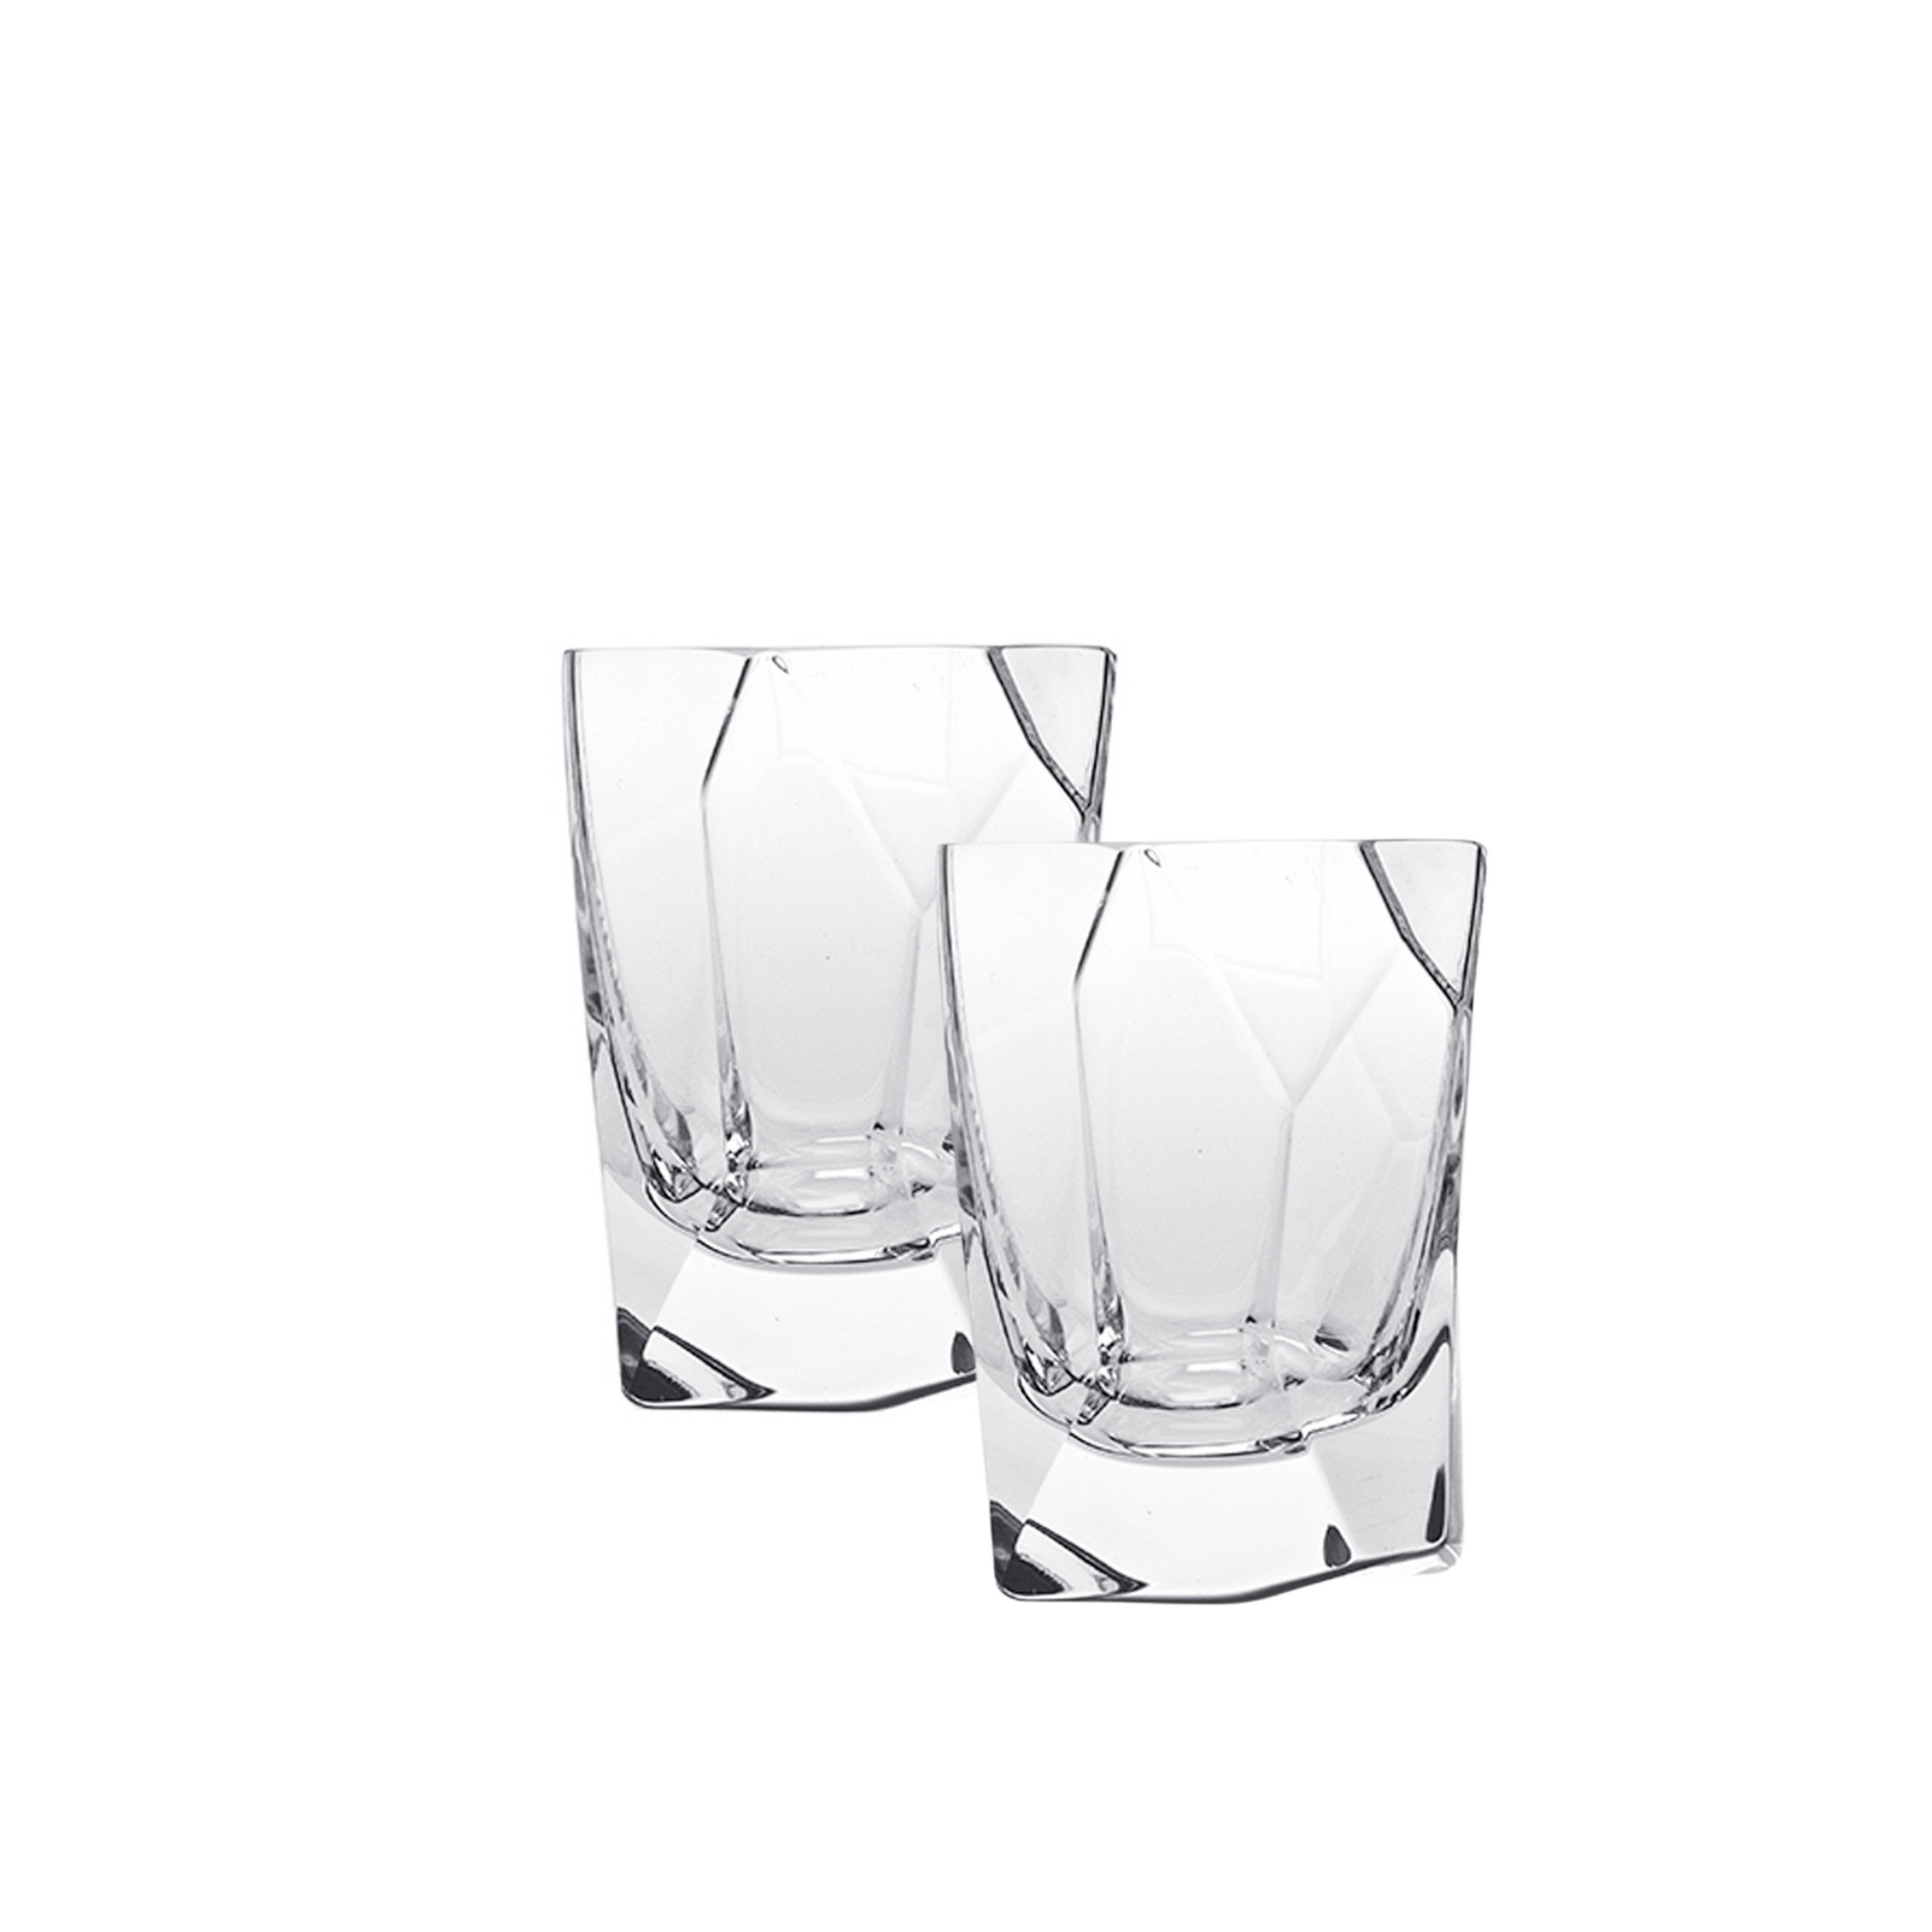 Crystal shot glass clear